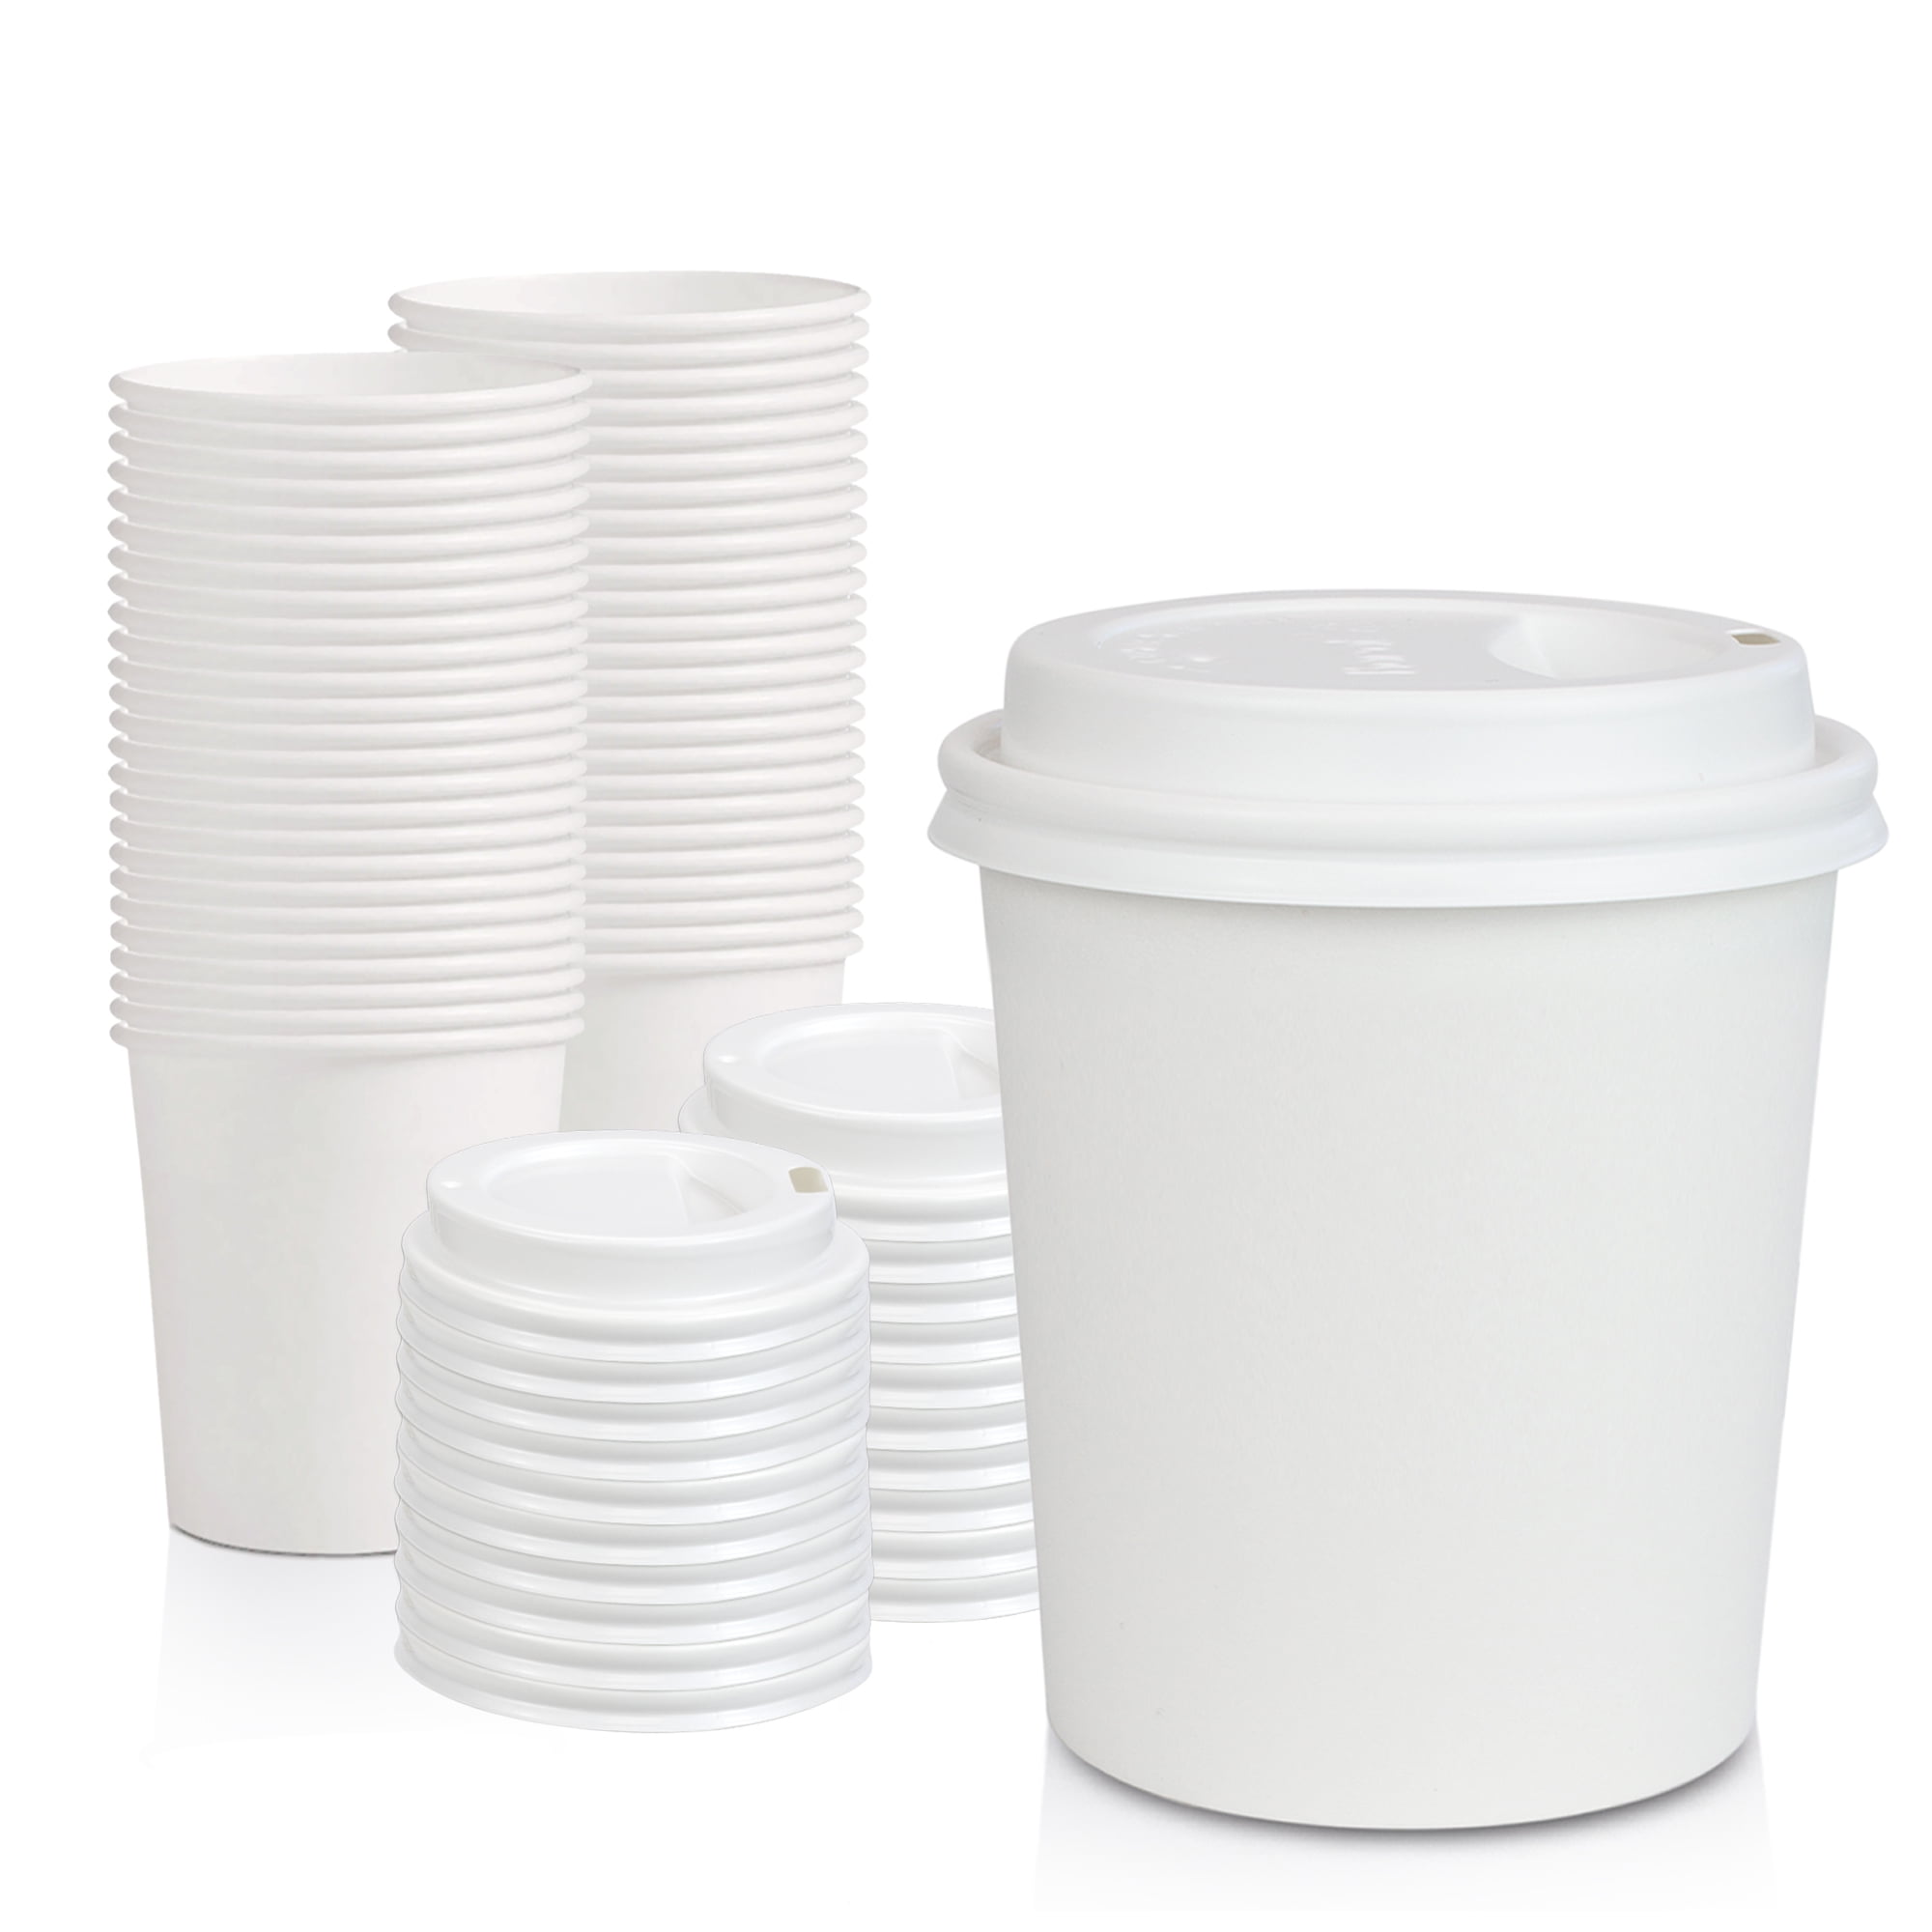 Disposable Plastic WHITE SIP LIDS 90mm Coffee Tea Hot/Cold Drinks for PAPER CUP